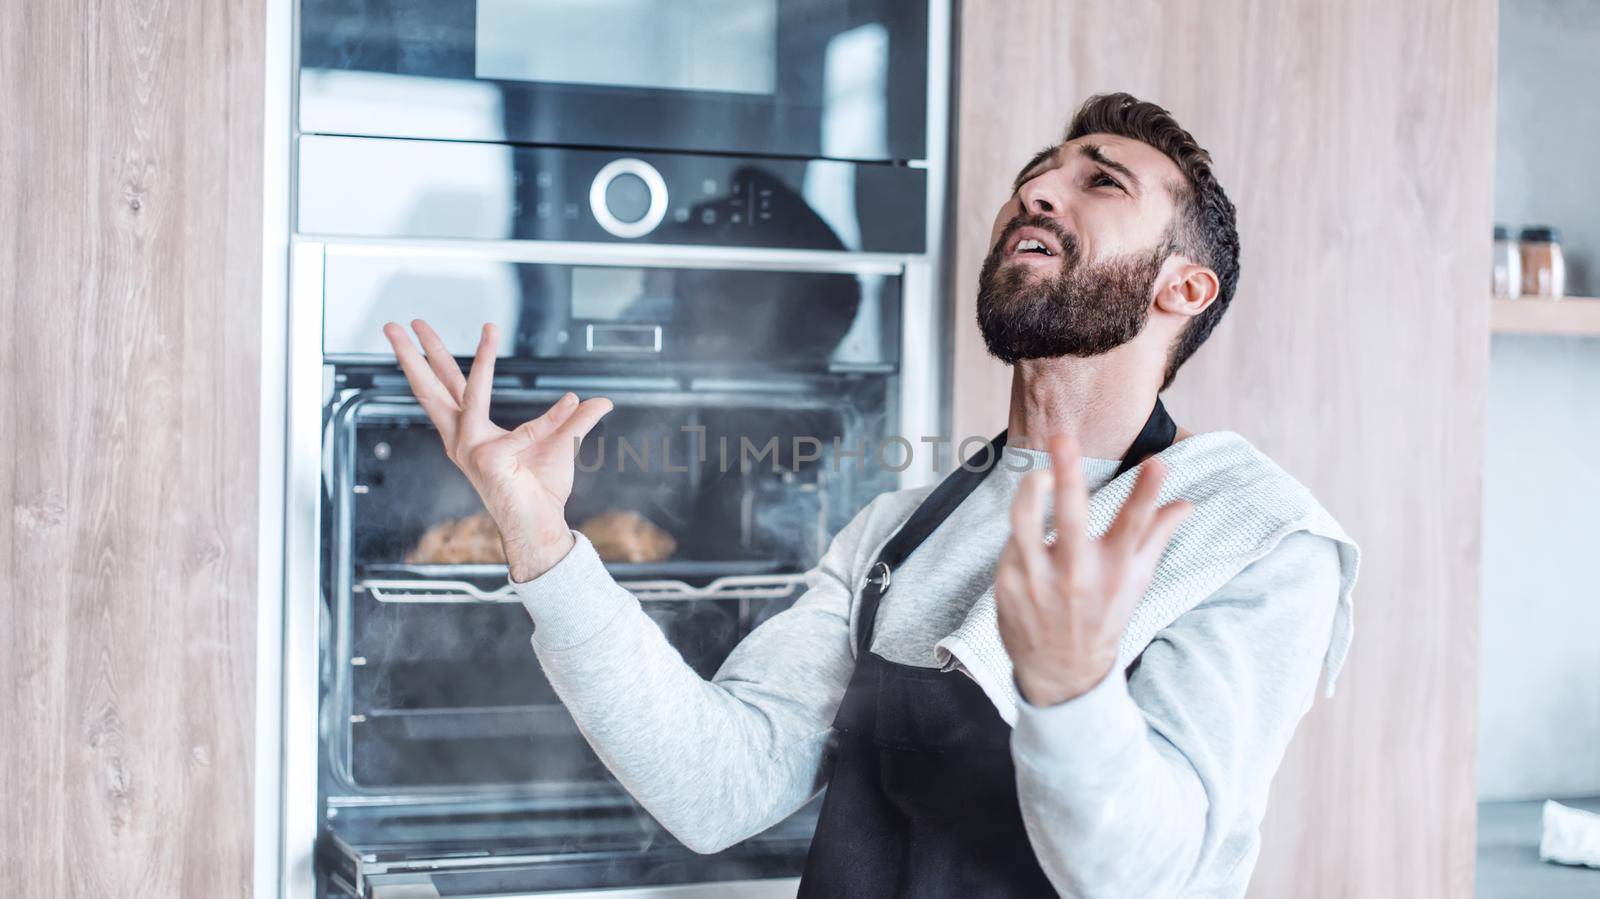 surprised man standing near the oven with burnt croissants. photo with copy space